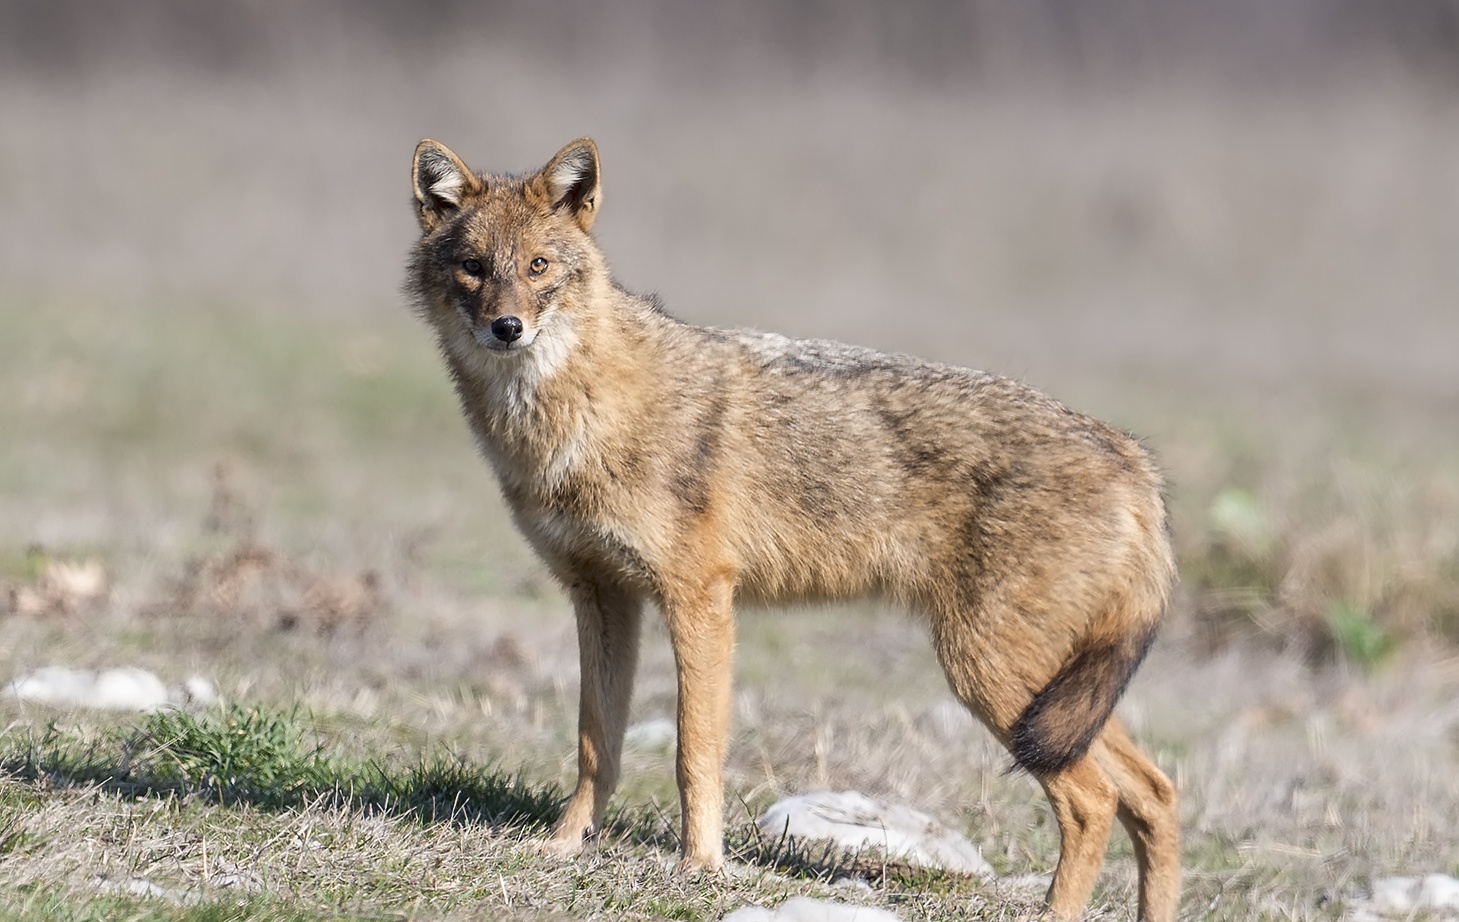 Facts About Jackals The Animal - Some Interesting Facts